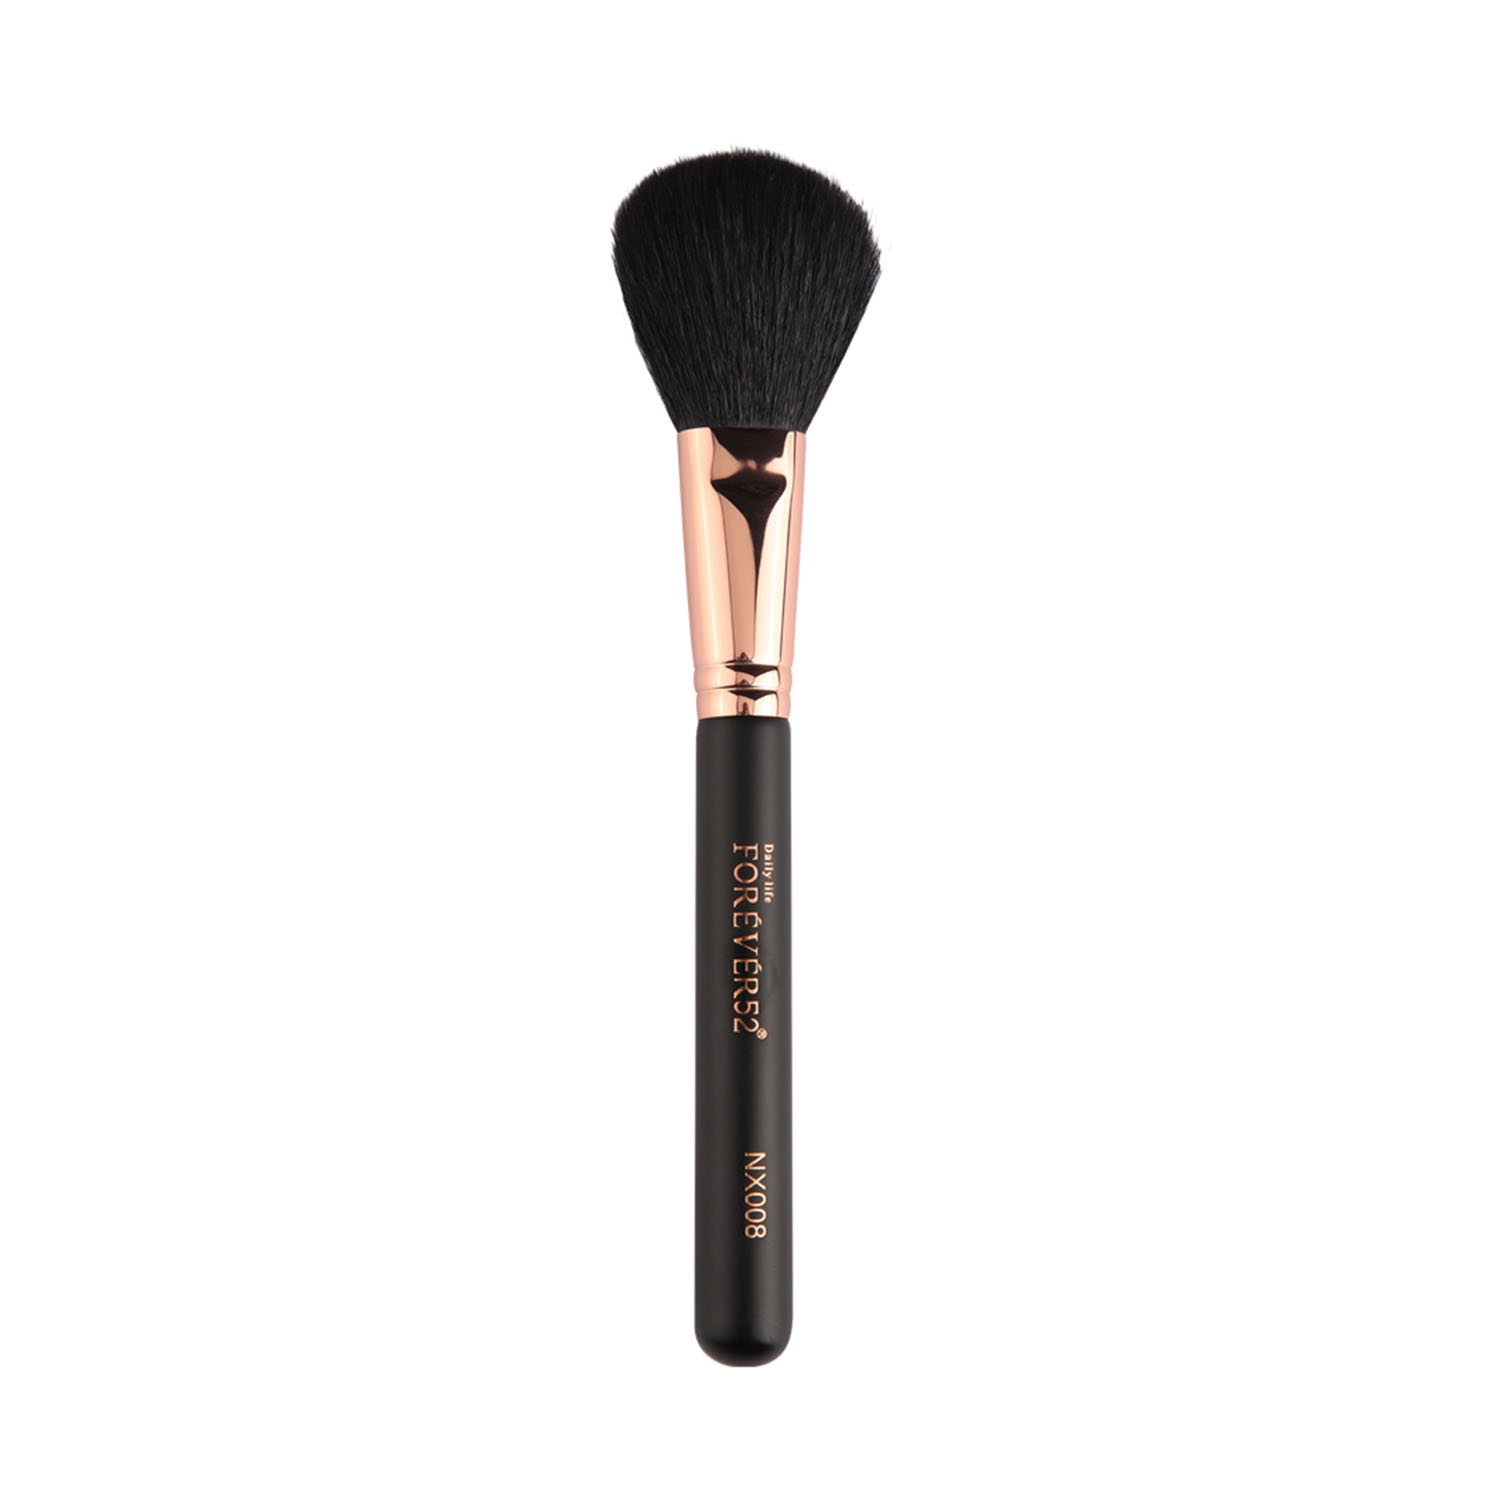 Daily Life Forever52 | Daily Life Forever52 Powder / Blush Brush - NX008 (1Pc)